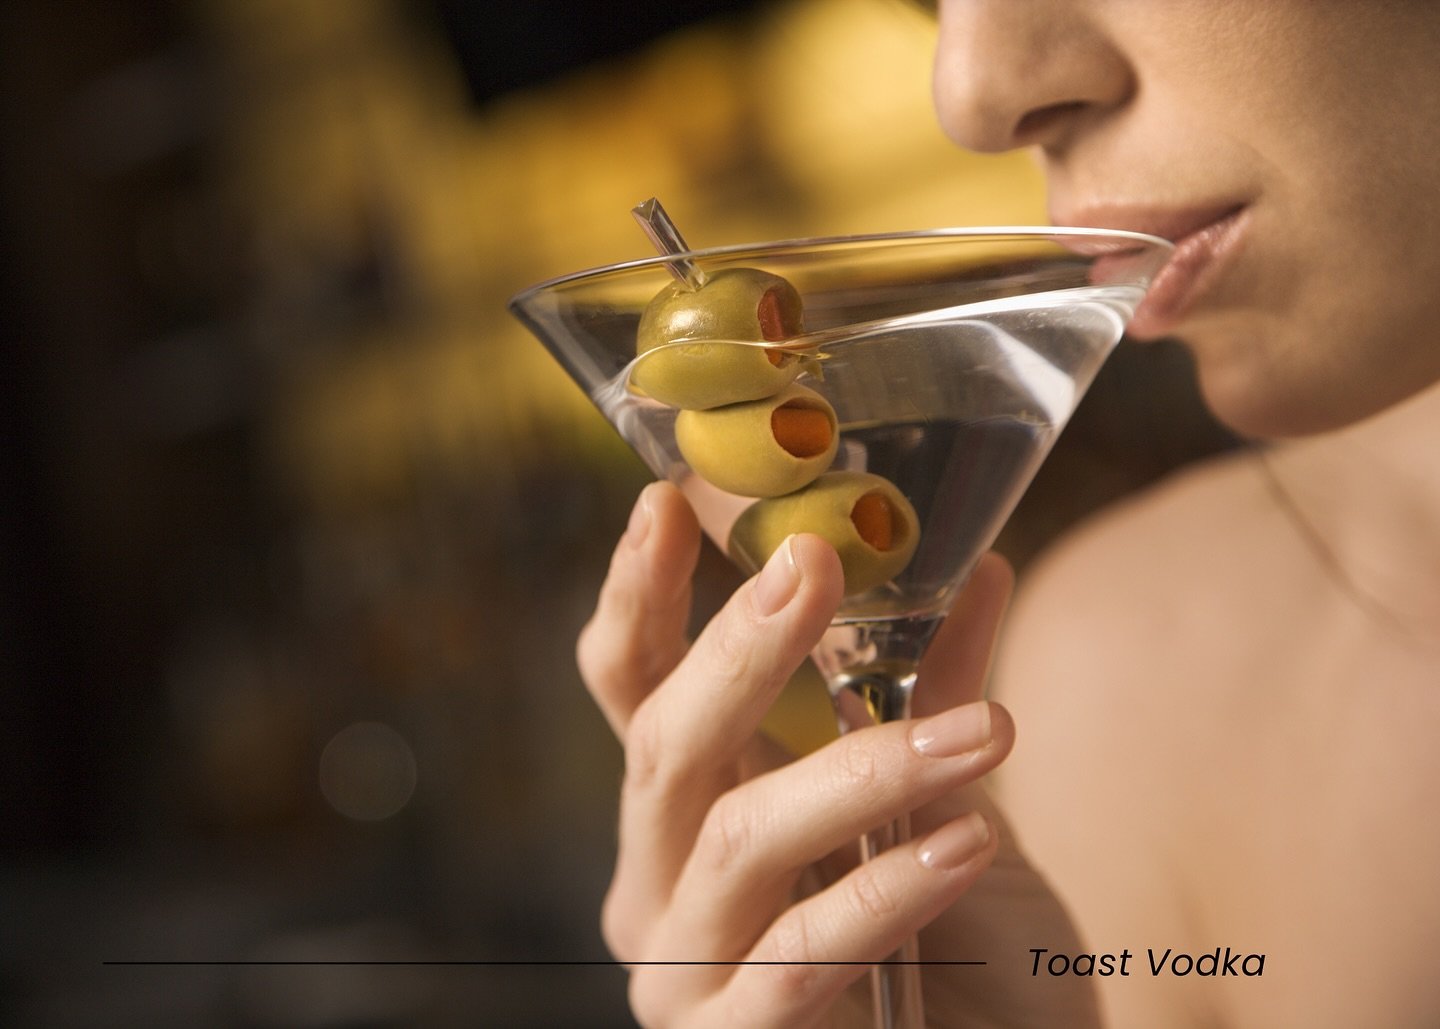 Spice up your Saturday happy hour with a Toast Vodka dirty martini. Smooth, sophisticated, and oh-so-satisfying. Cheers to the perfect weekend sip! 🍸✨ 

#dirtymartini #toastvodka #happyhour #explore